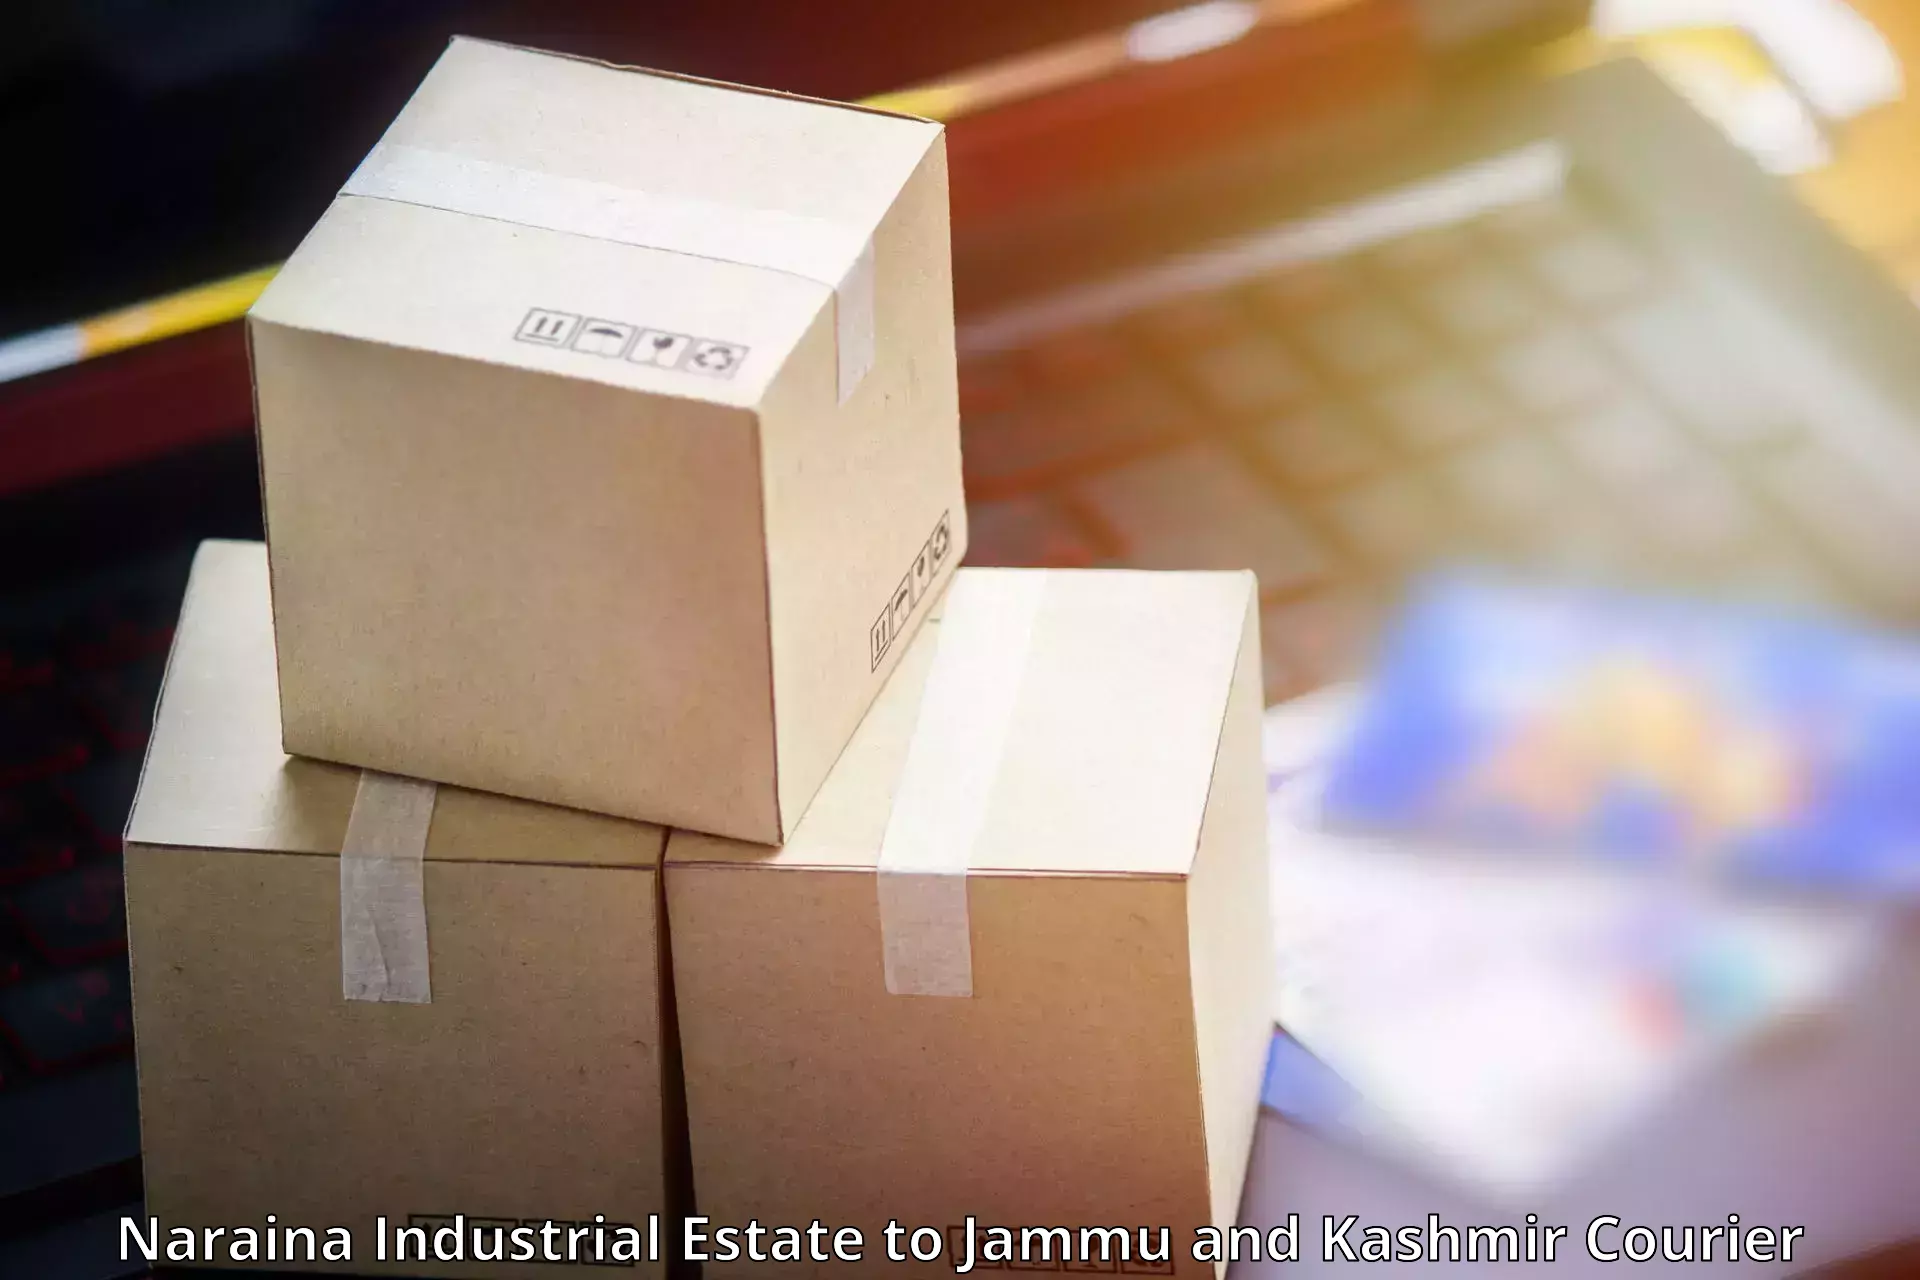 Courier service efficiency Naraina Industrial Estate to Jammu and Kashmir